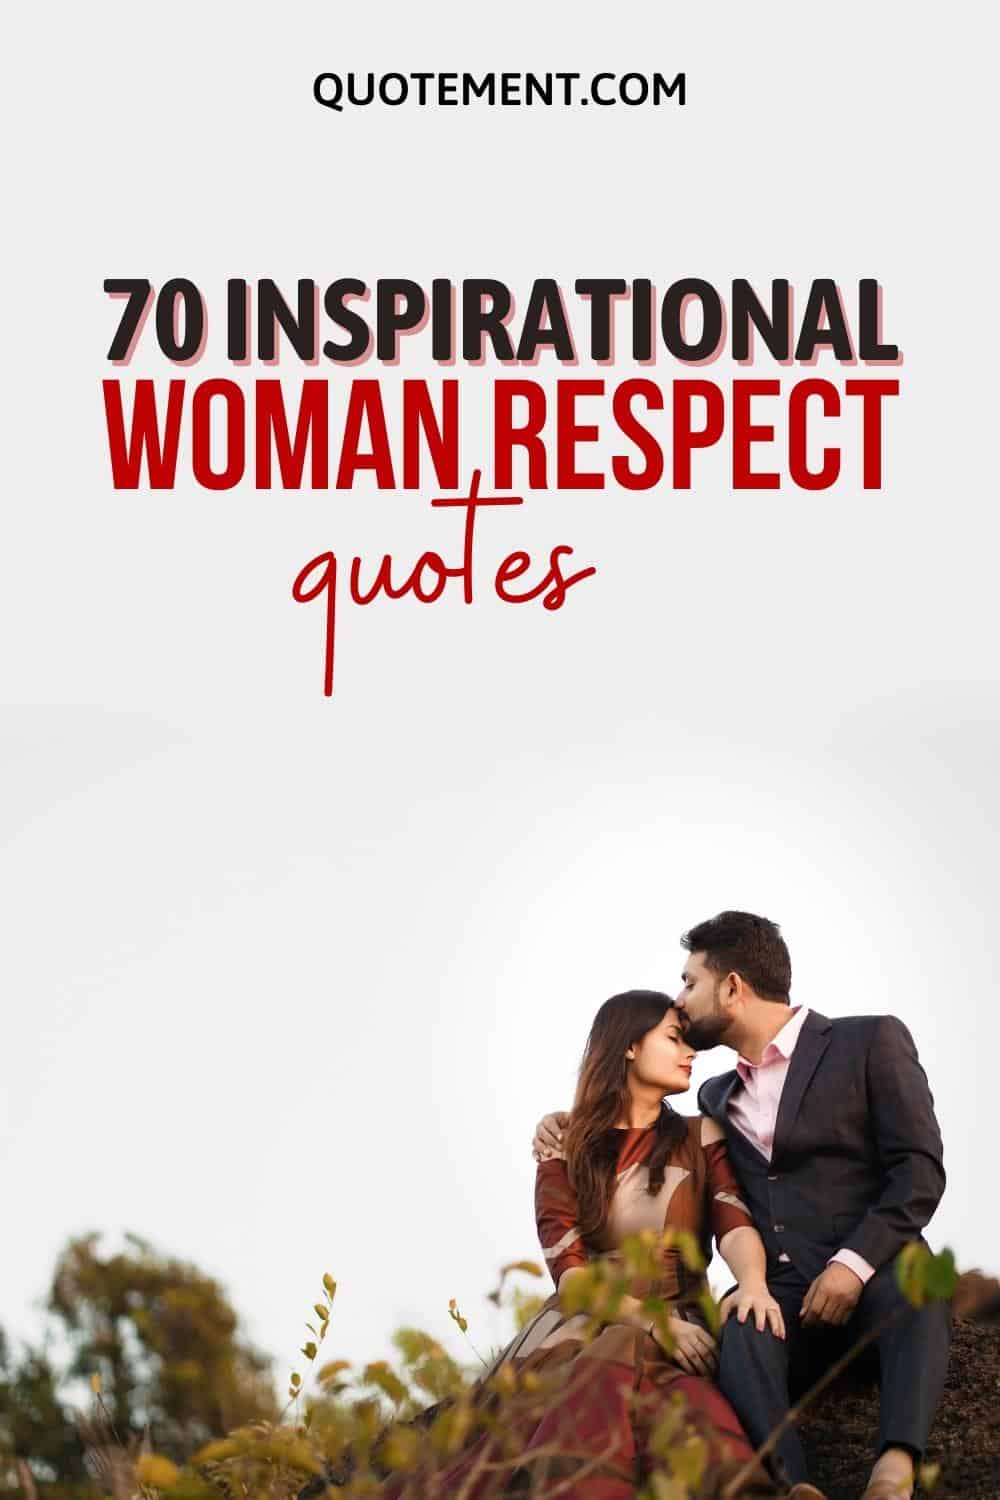 70 Woman Respect Quotes That Remind About Women’s Worth